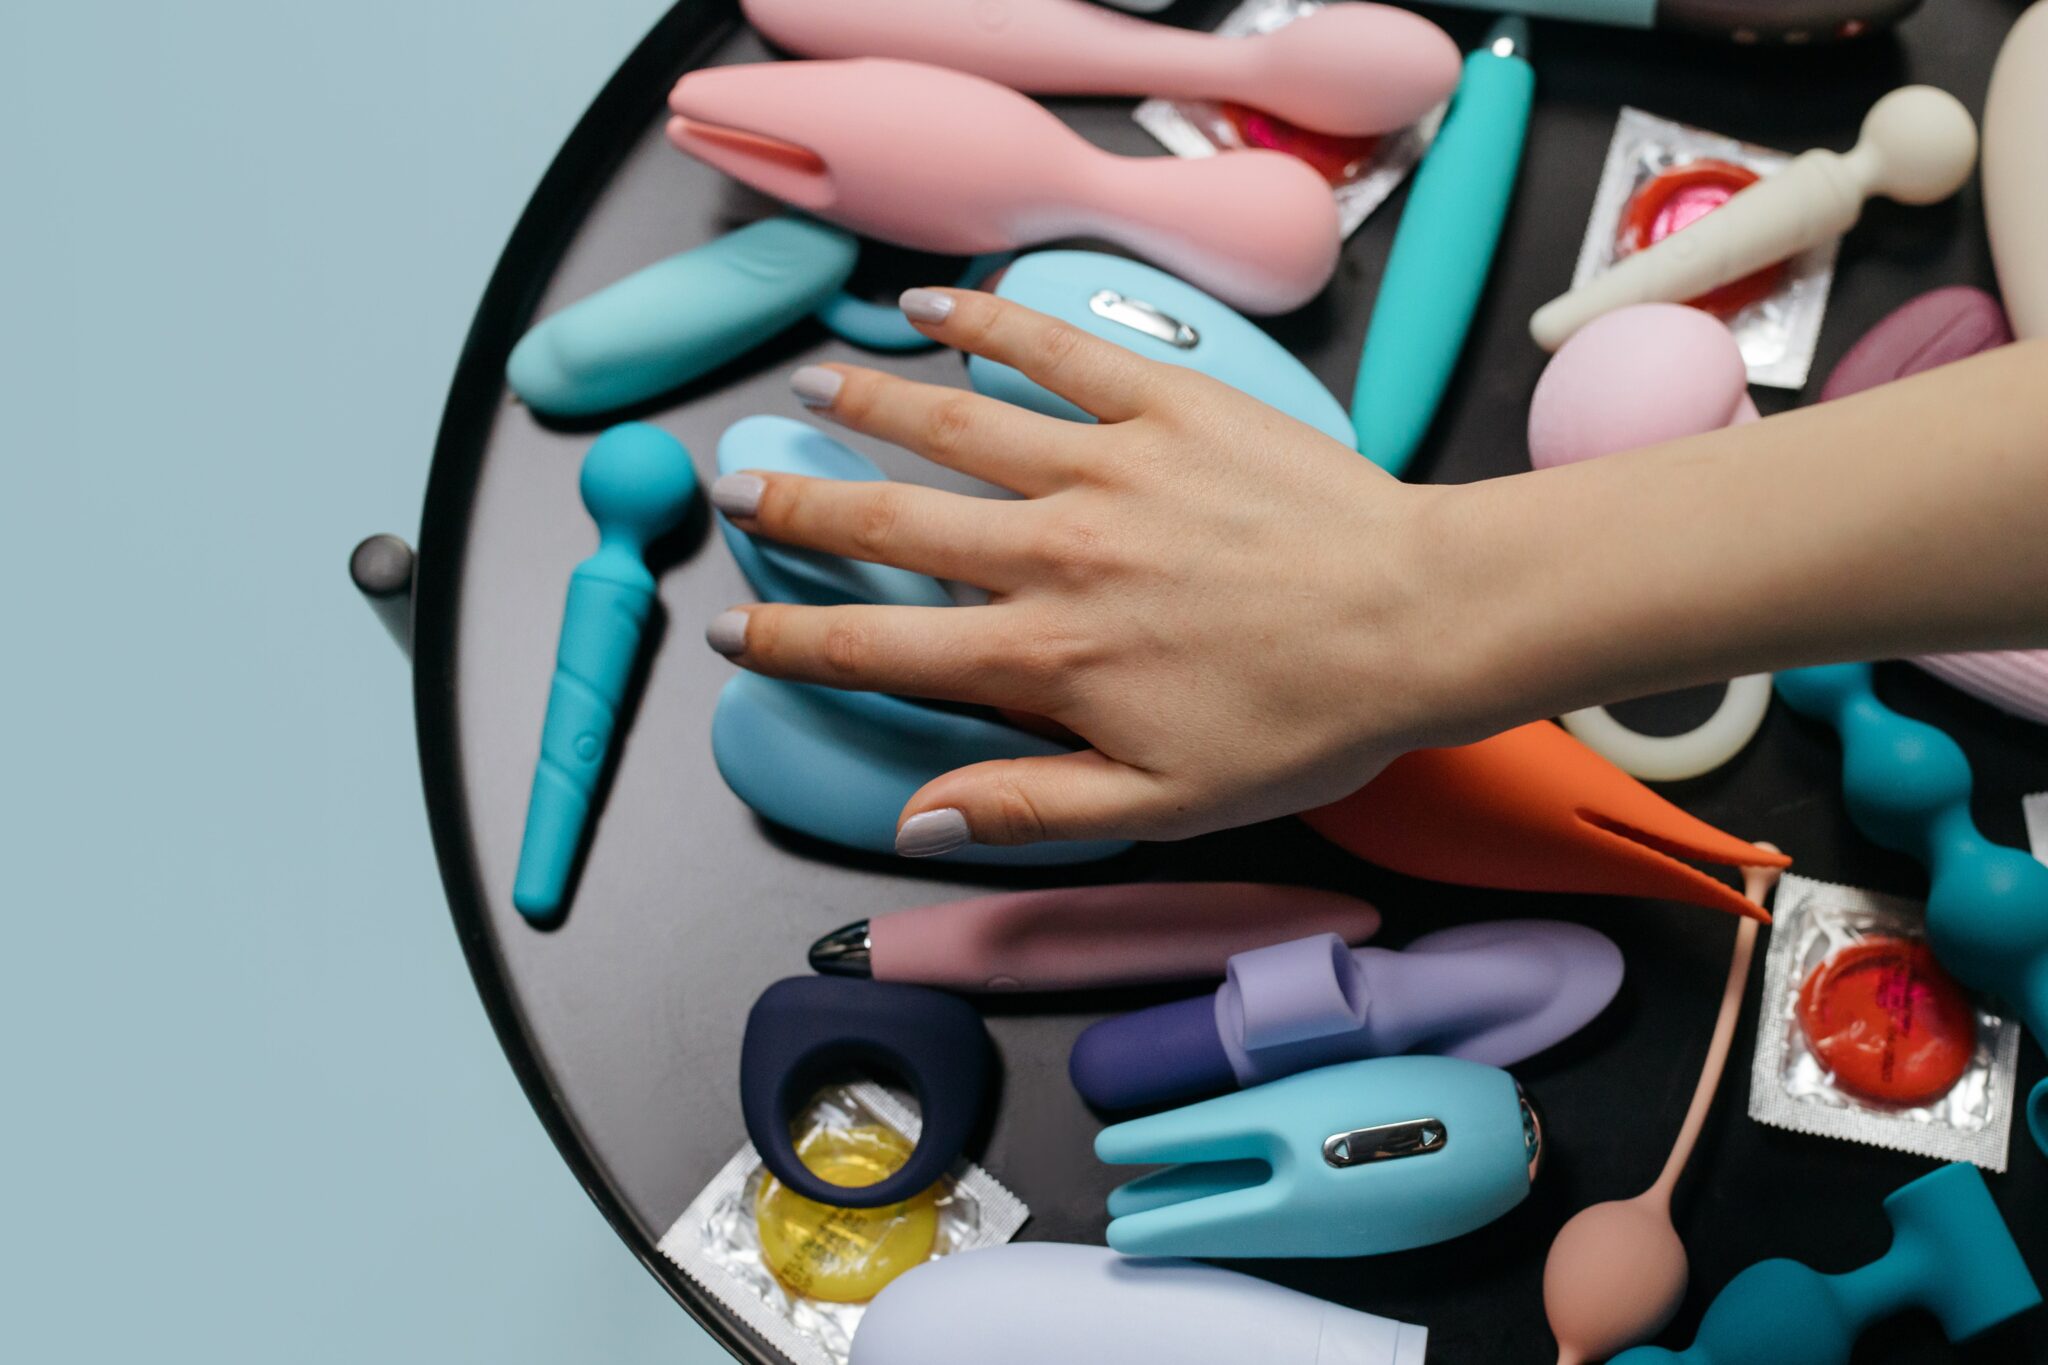 A woman's hand hovering over a table full of colorful sex toys including vibrators and dildos.